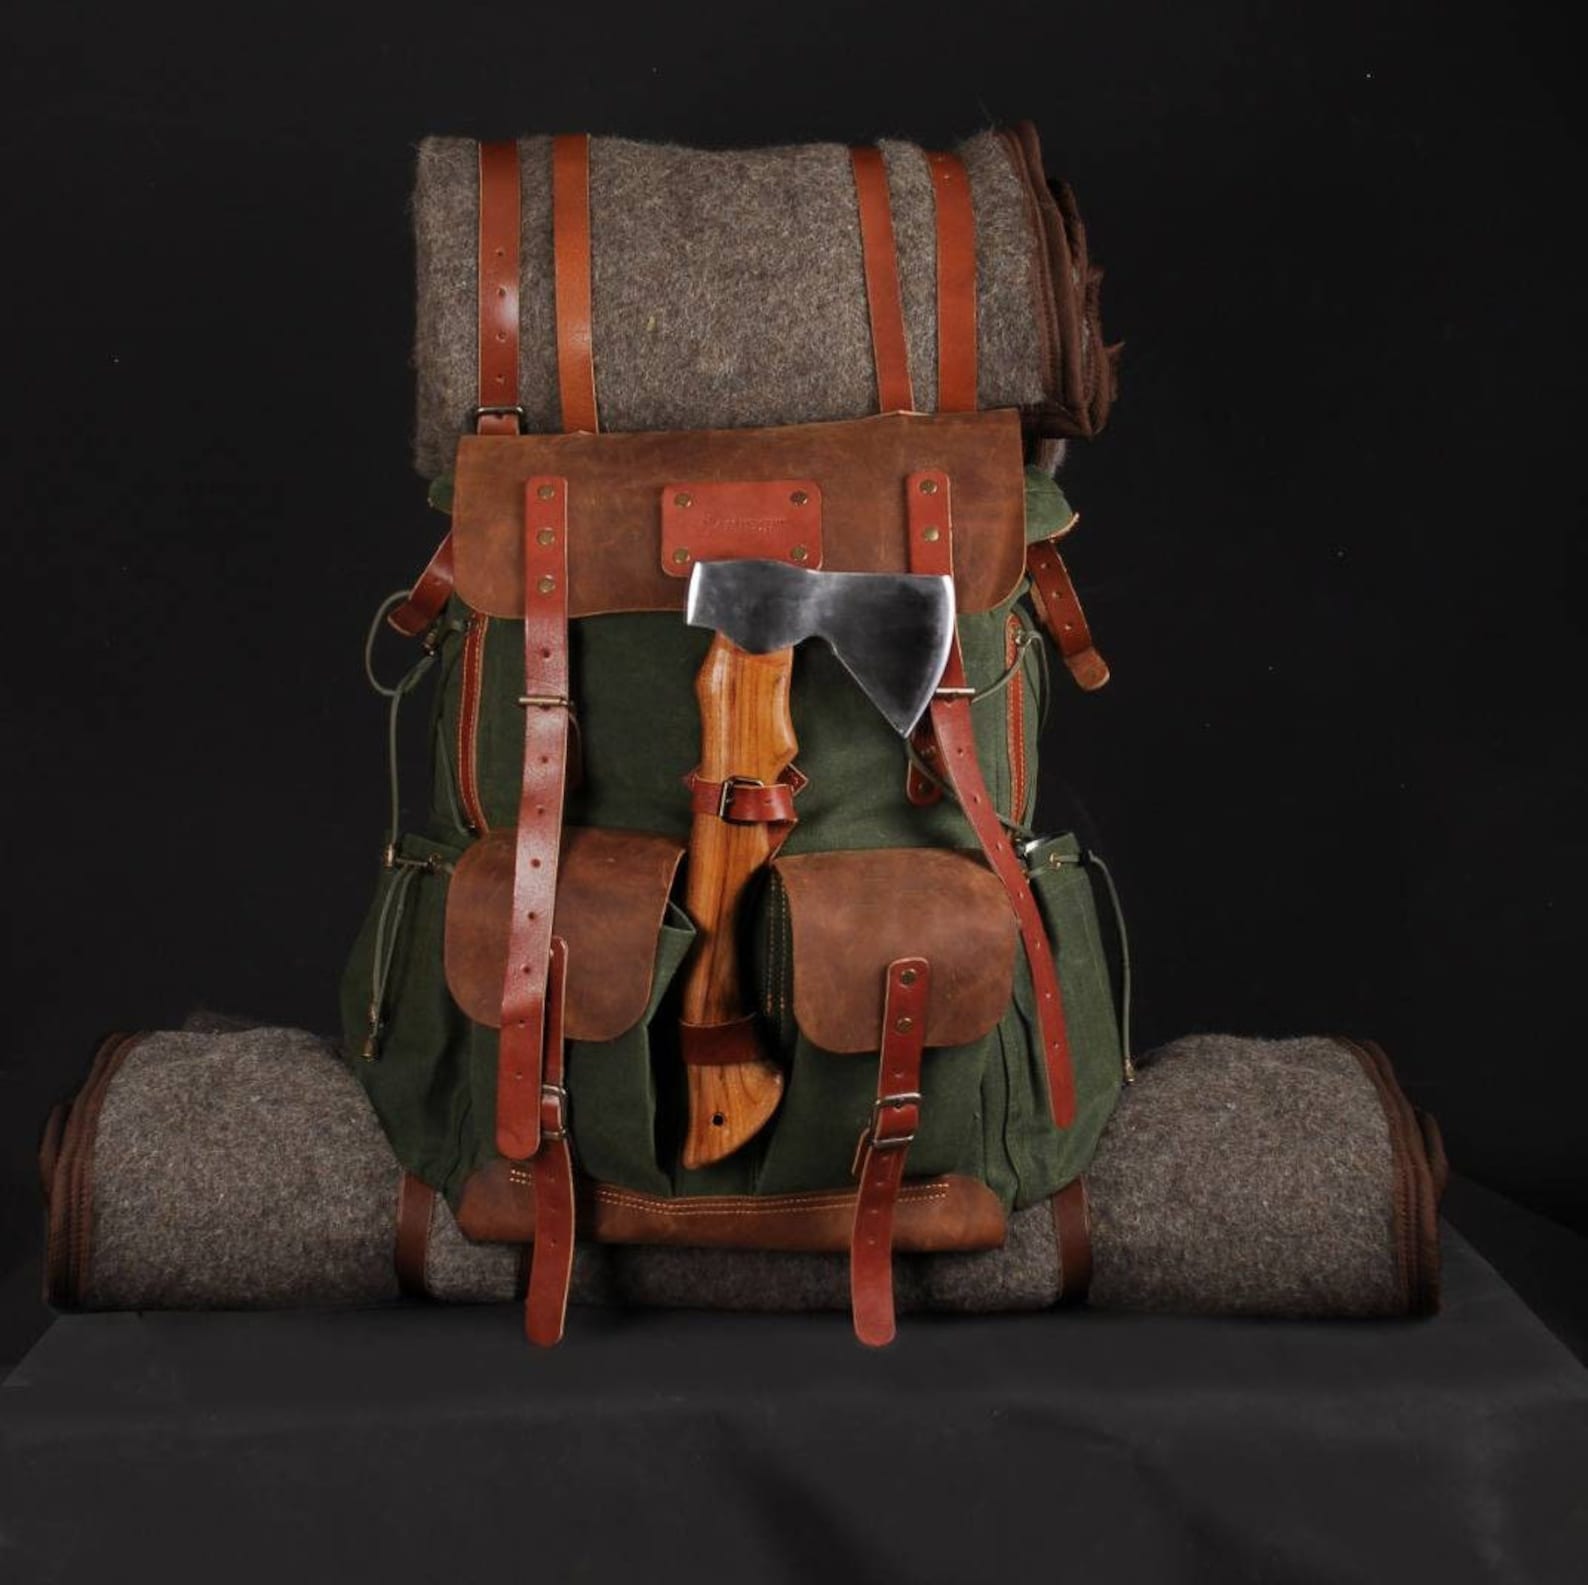 Bushcraft Handmade Leather and Canvas Backpack for Travel, Camping, Hiking, Hunting | 50 Liters | Birthday Gift | Gift For Him  | bushcraft - camping - hiking backpack 99percenthandmade   